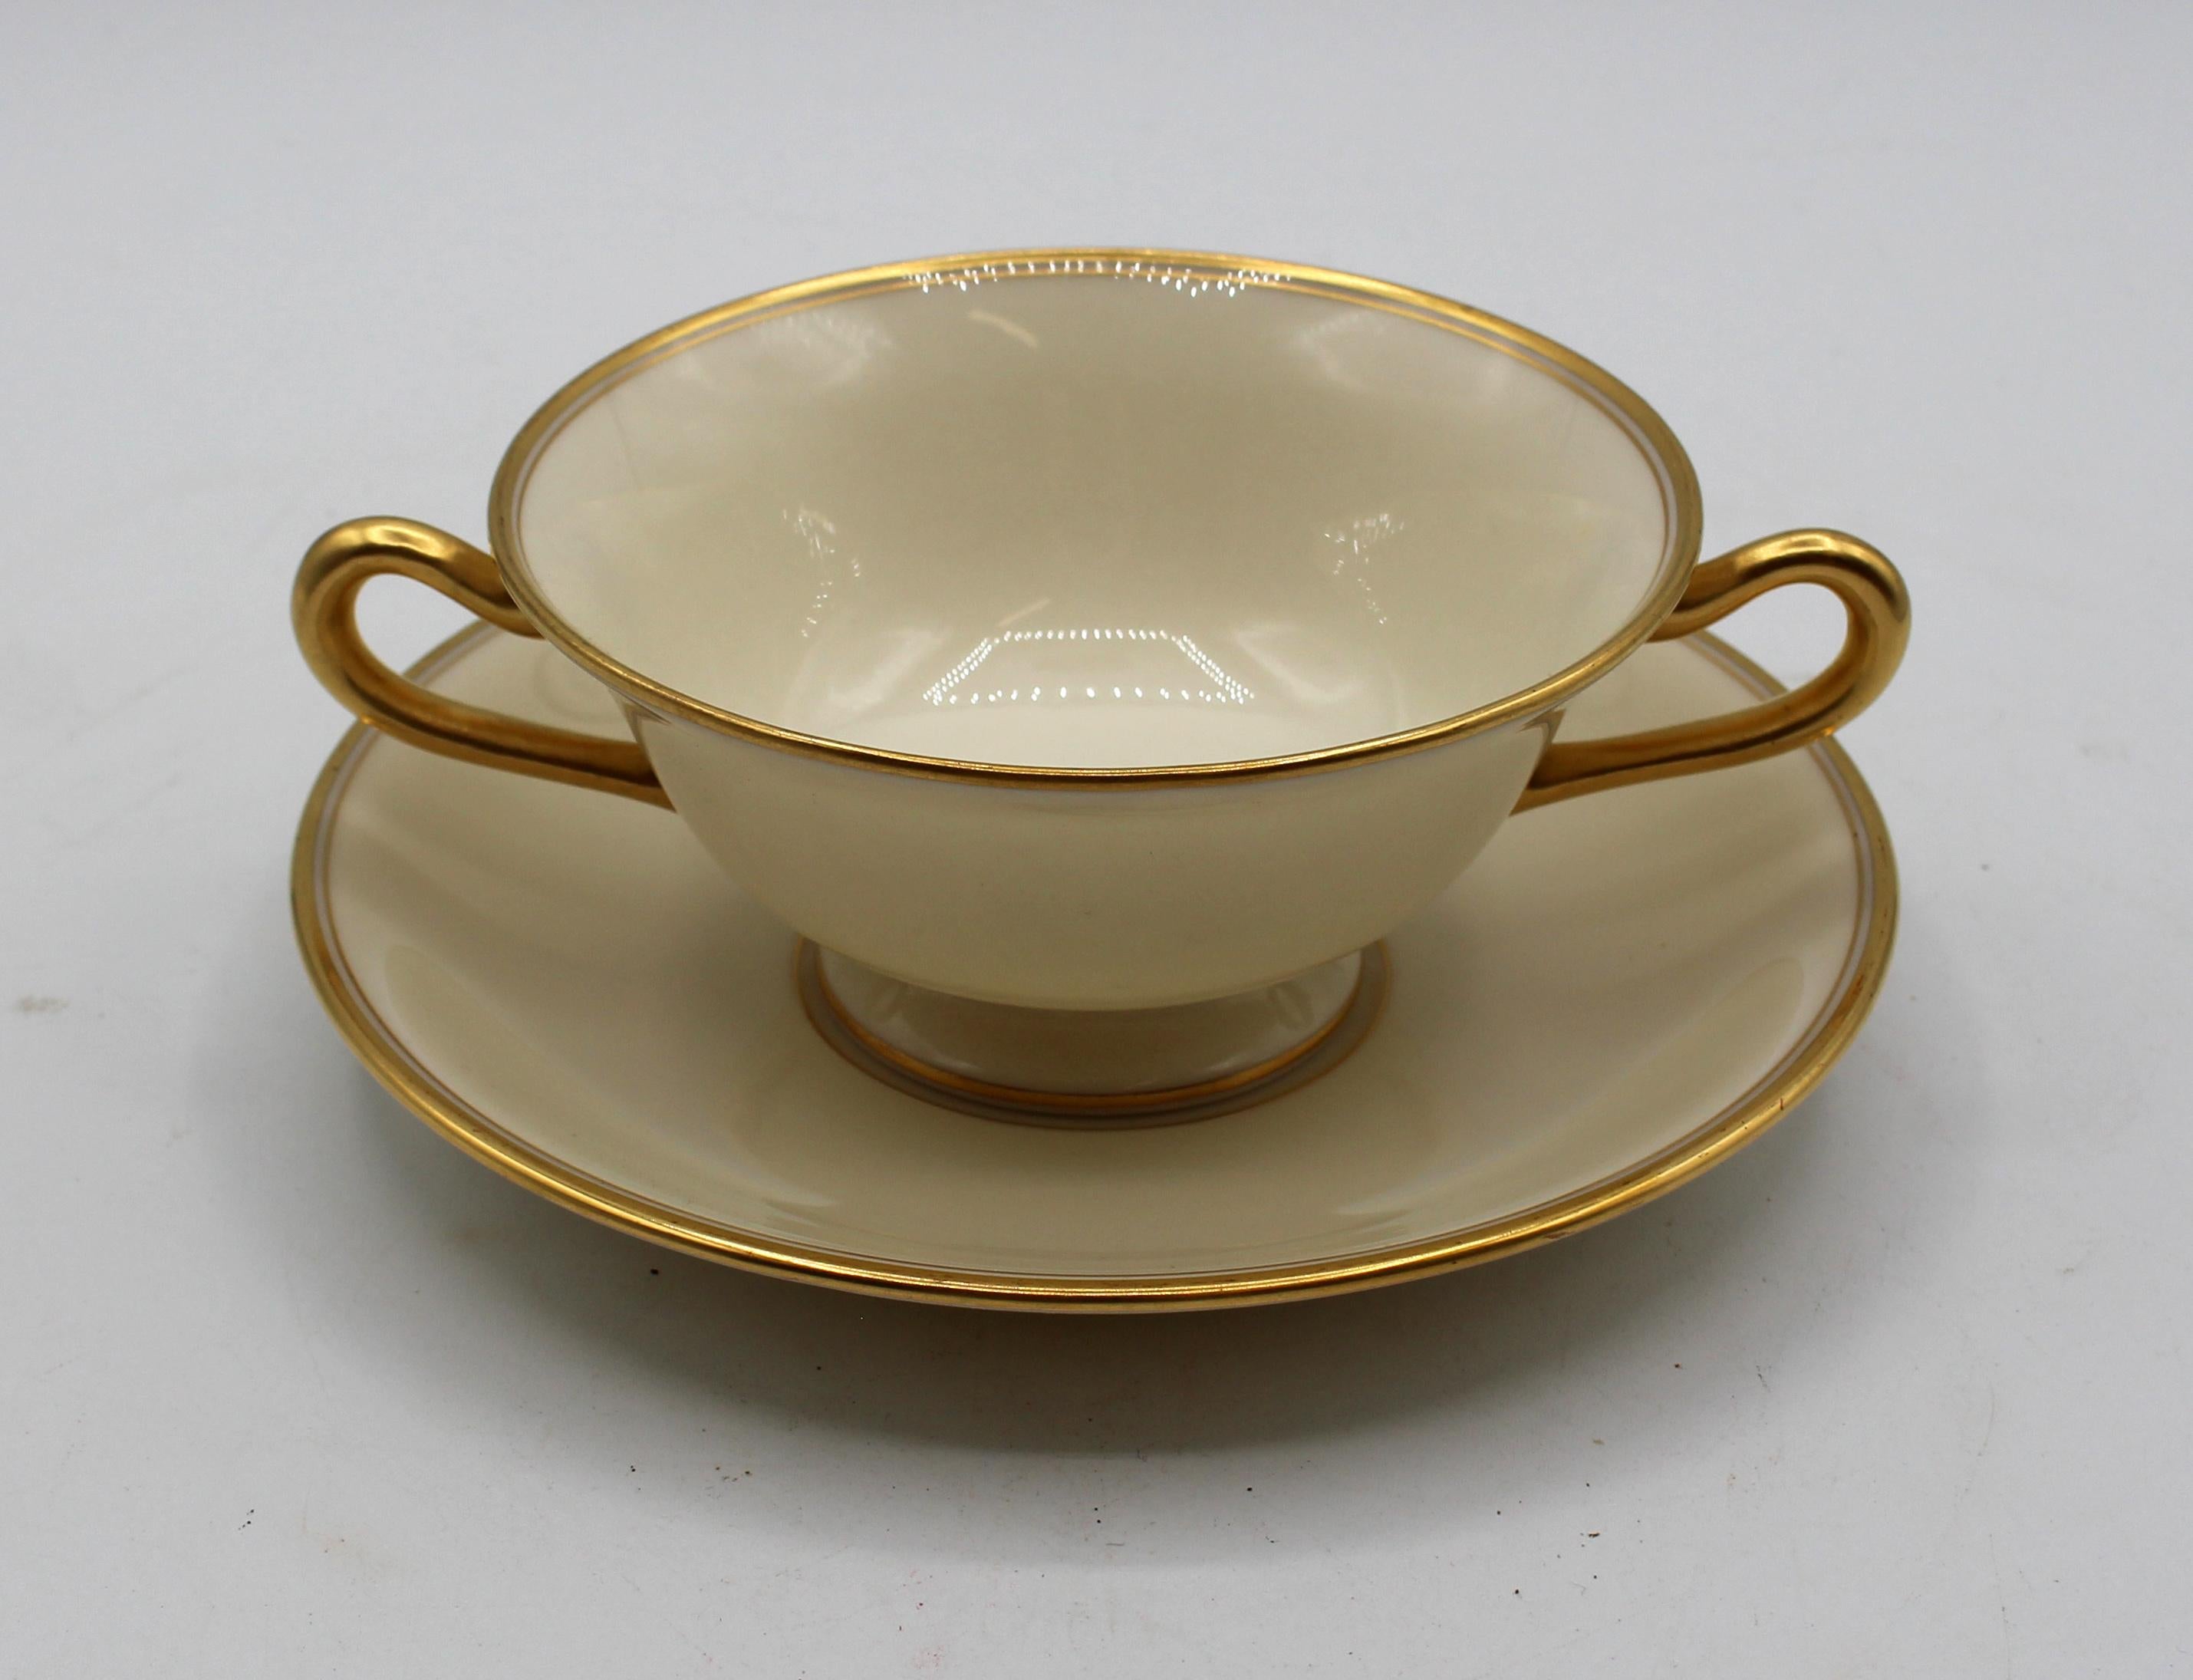 Early 20th century set of 8 boullion cups & saucers, Tiffany & Co. Elegant simplicity. Made by Lenox for Tiffany & Co.
Cups: 6